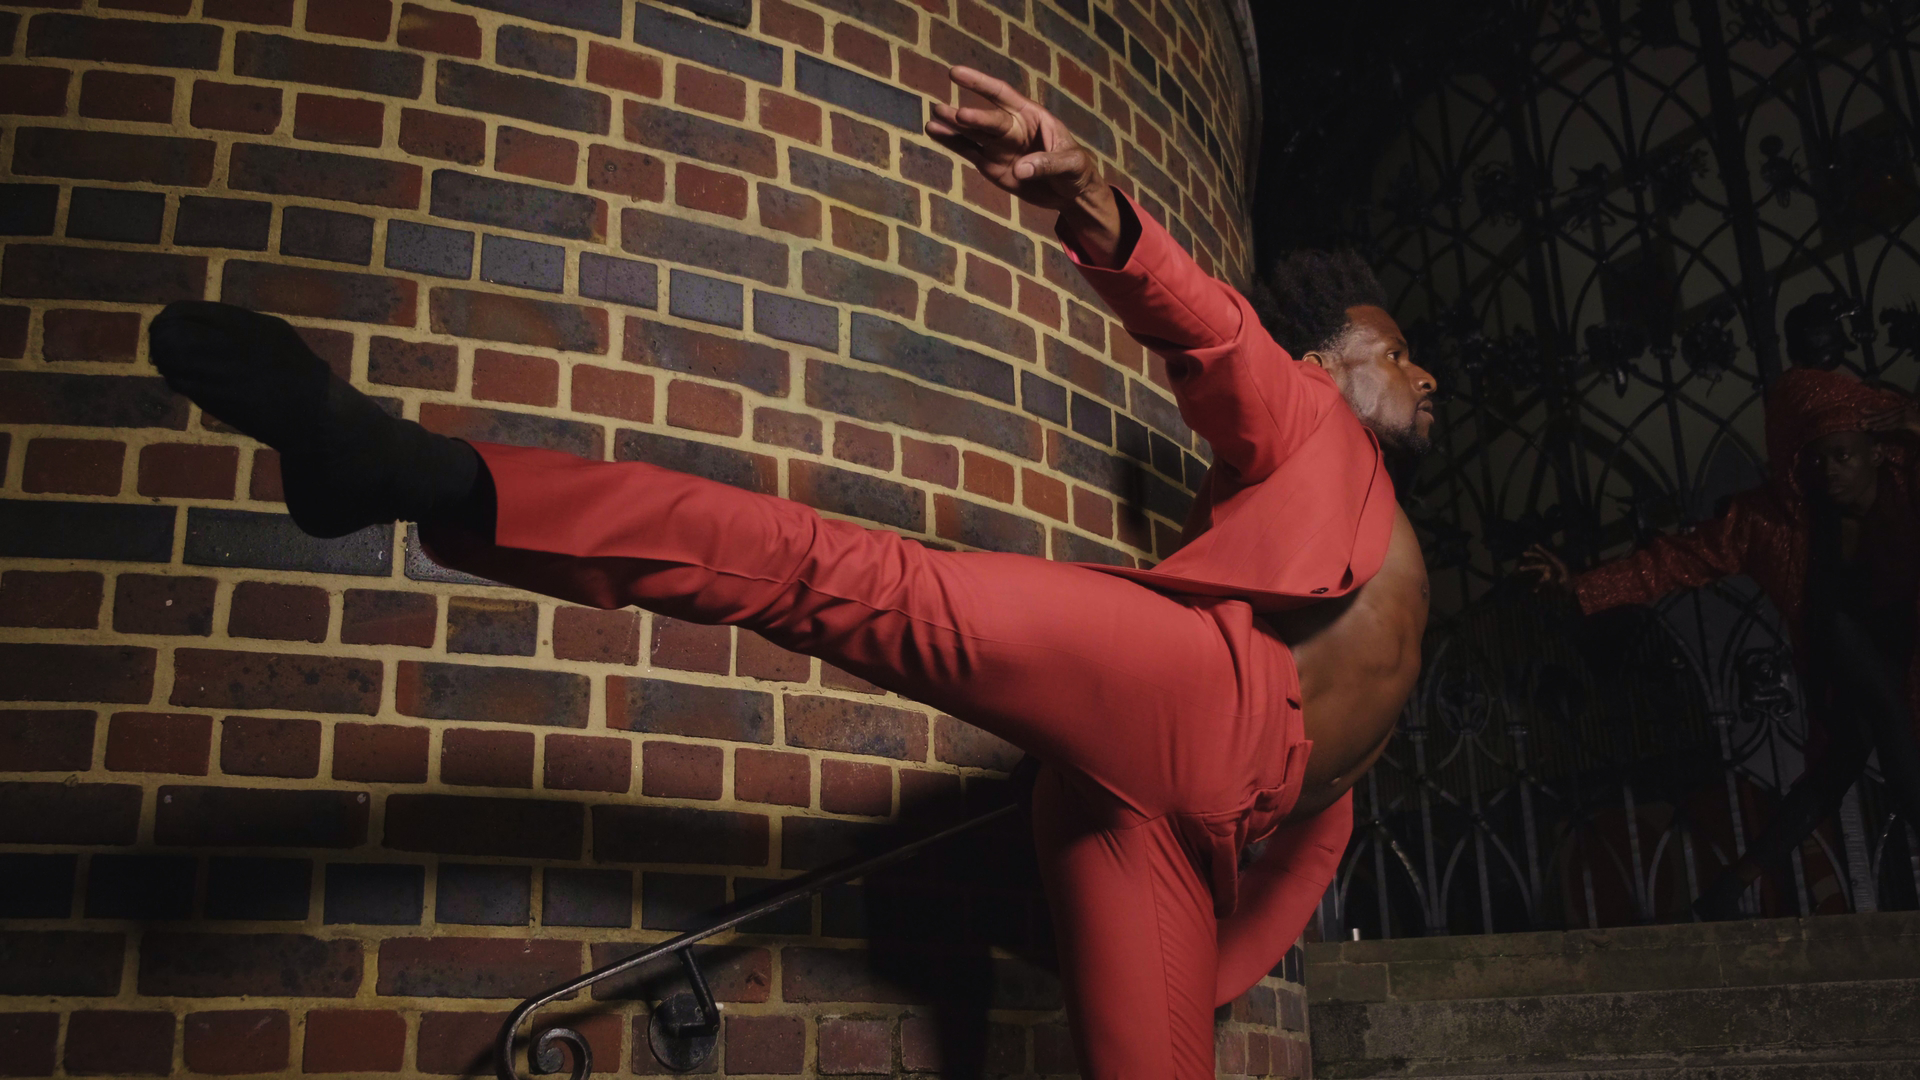 Photograph of a Black ballet dancer wearing red, stood against a wall